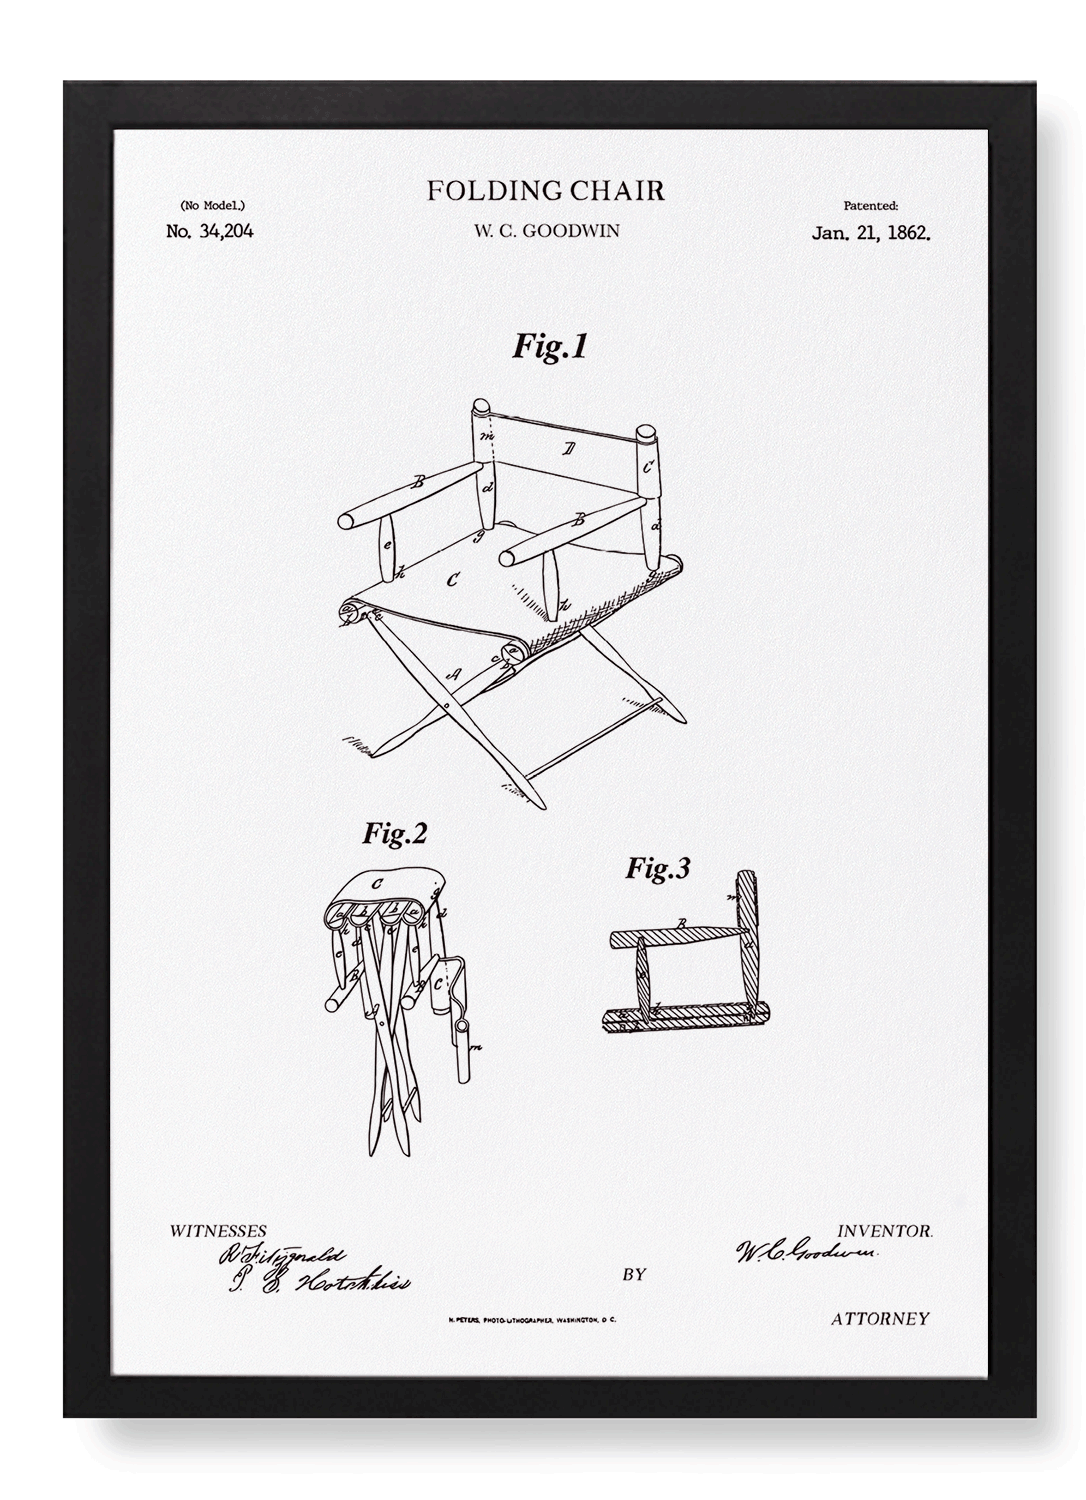 PATENT OF FOLDING CHAIR (1862)